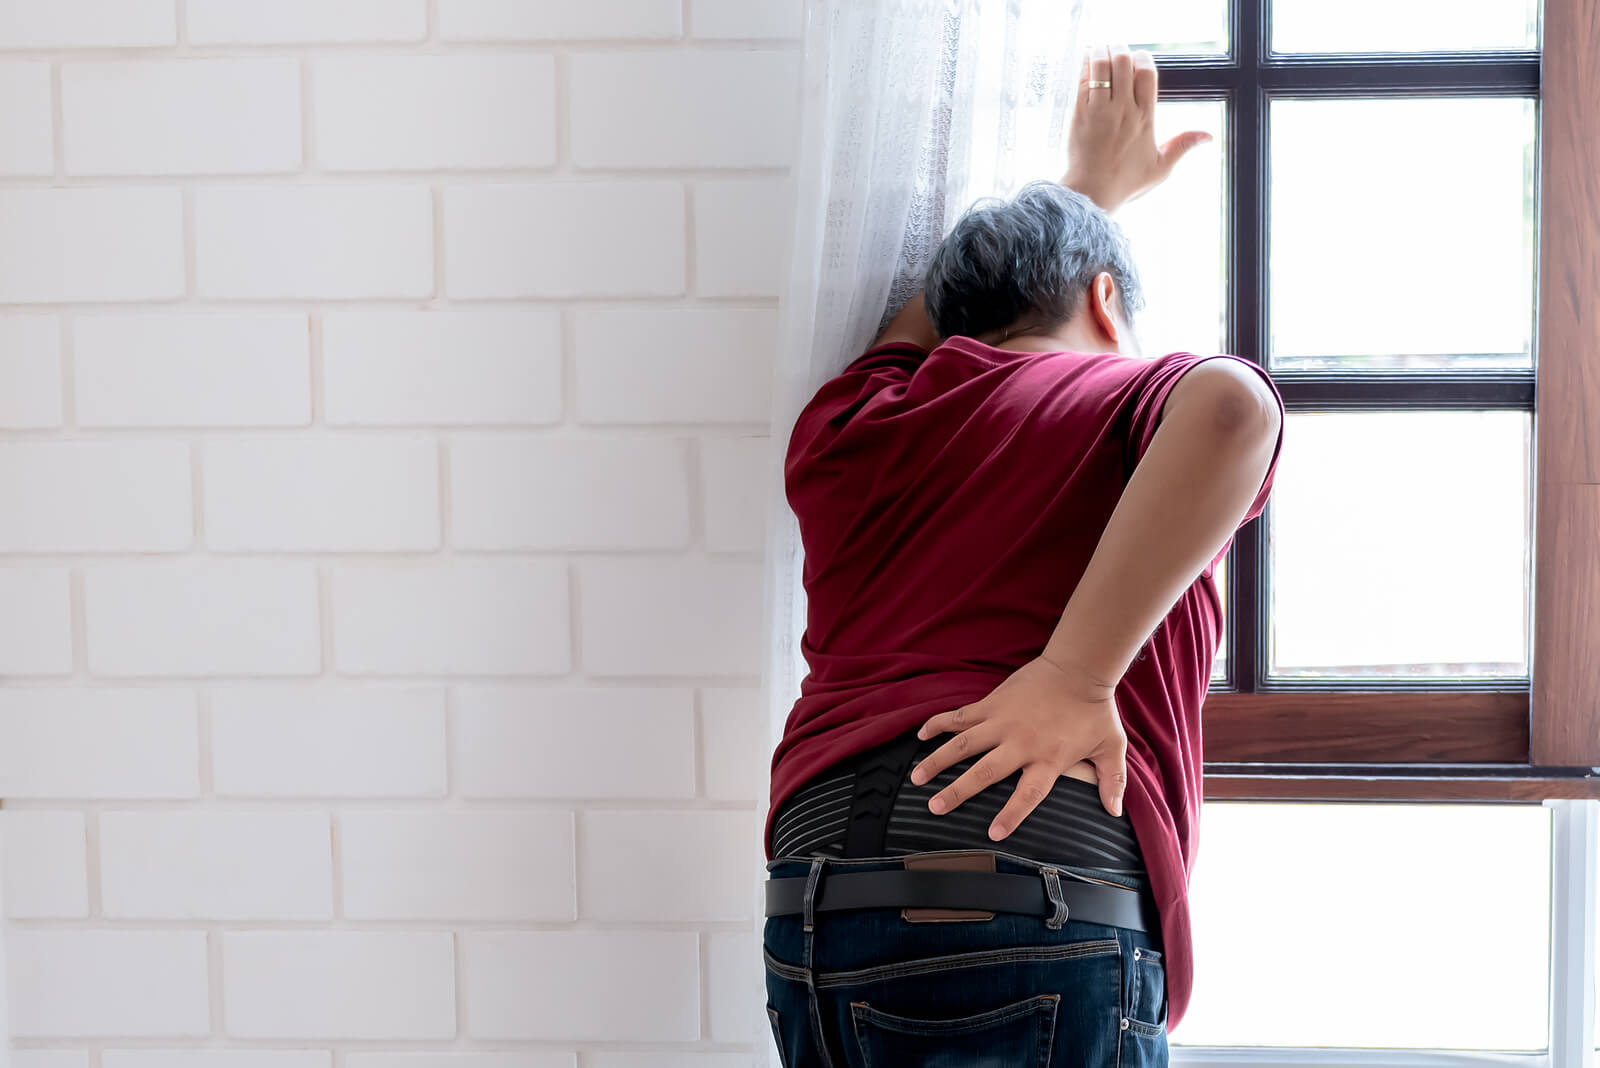 A person leans on a window they are looking out of. They are holding their lower back. Learn more about chronic illness counseling by contacting a chronic illness therapist in New Bern, NC. We offer pain reprocessing therapy in New Bern, NC and other services.